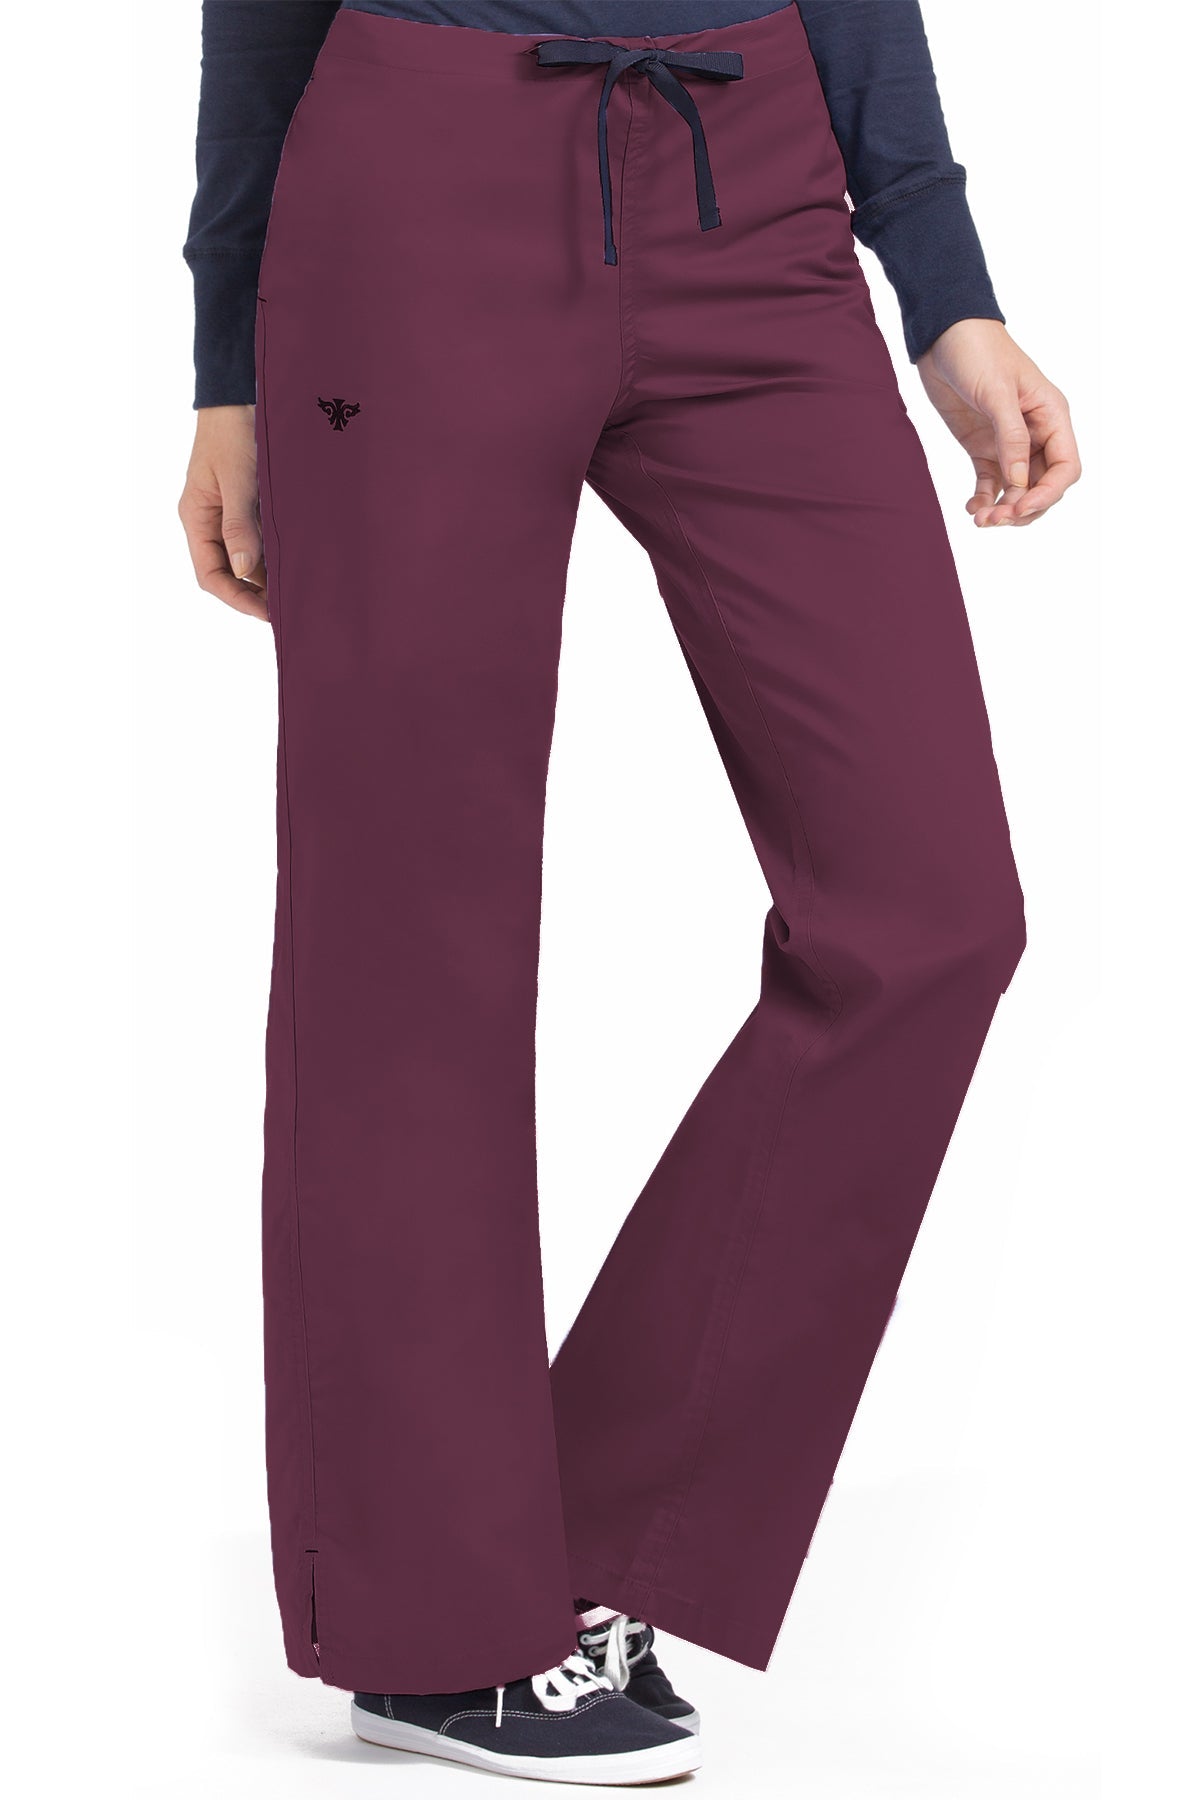 Med Couture 8705 SIGNATURE DRAWSTRING PANT